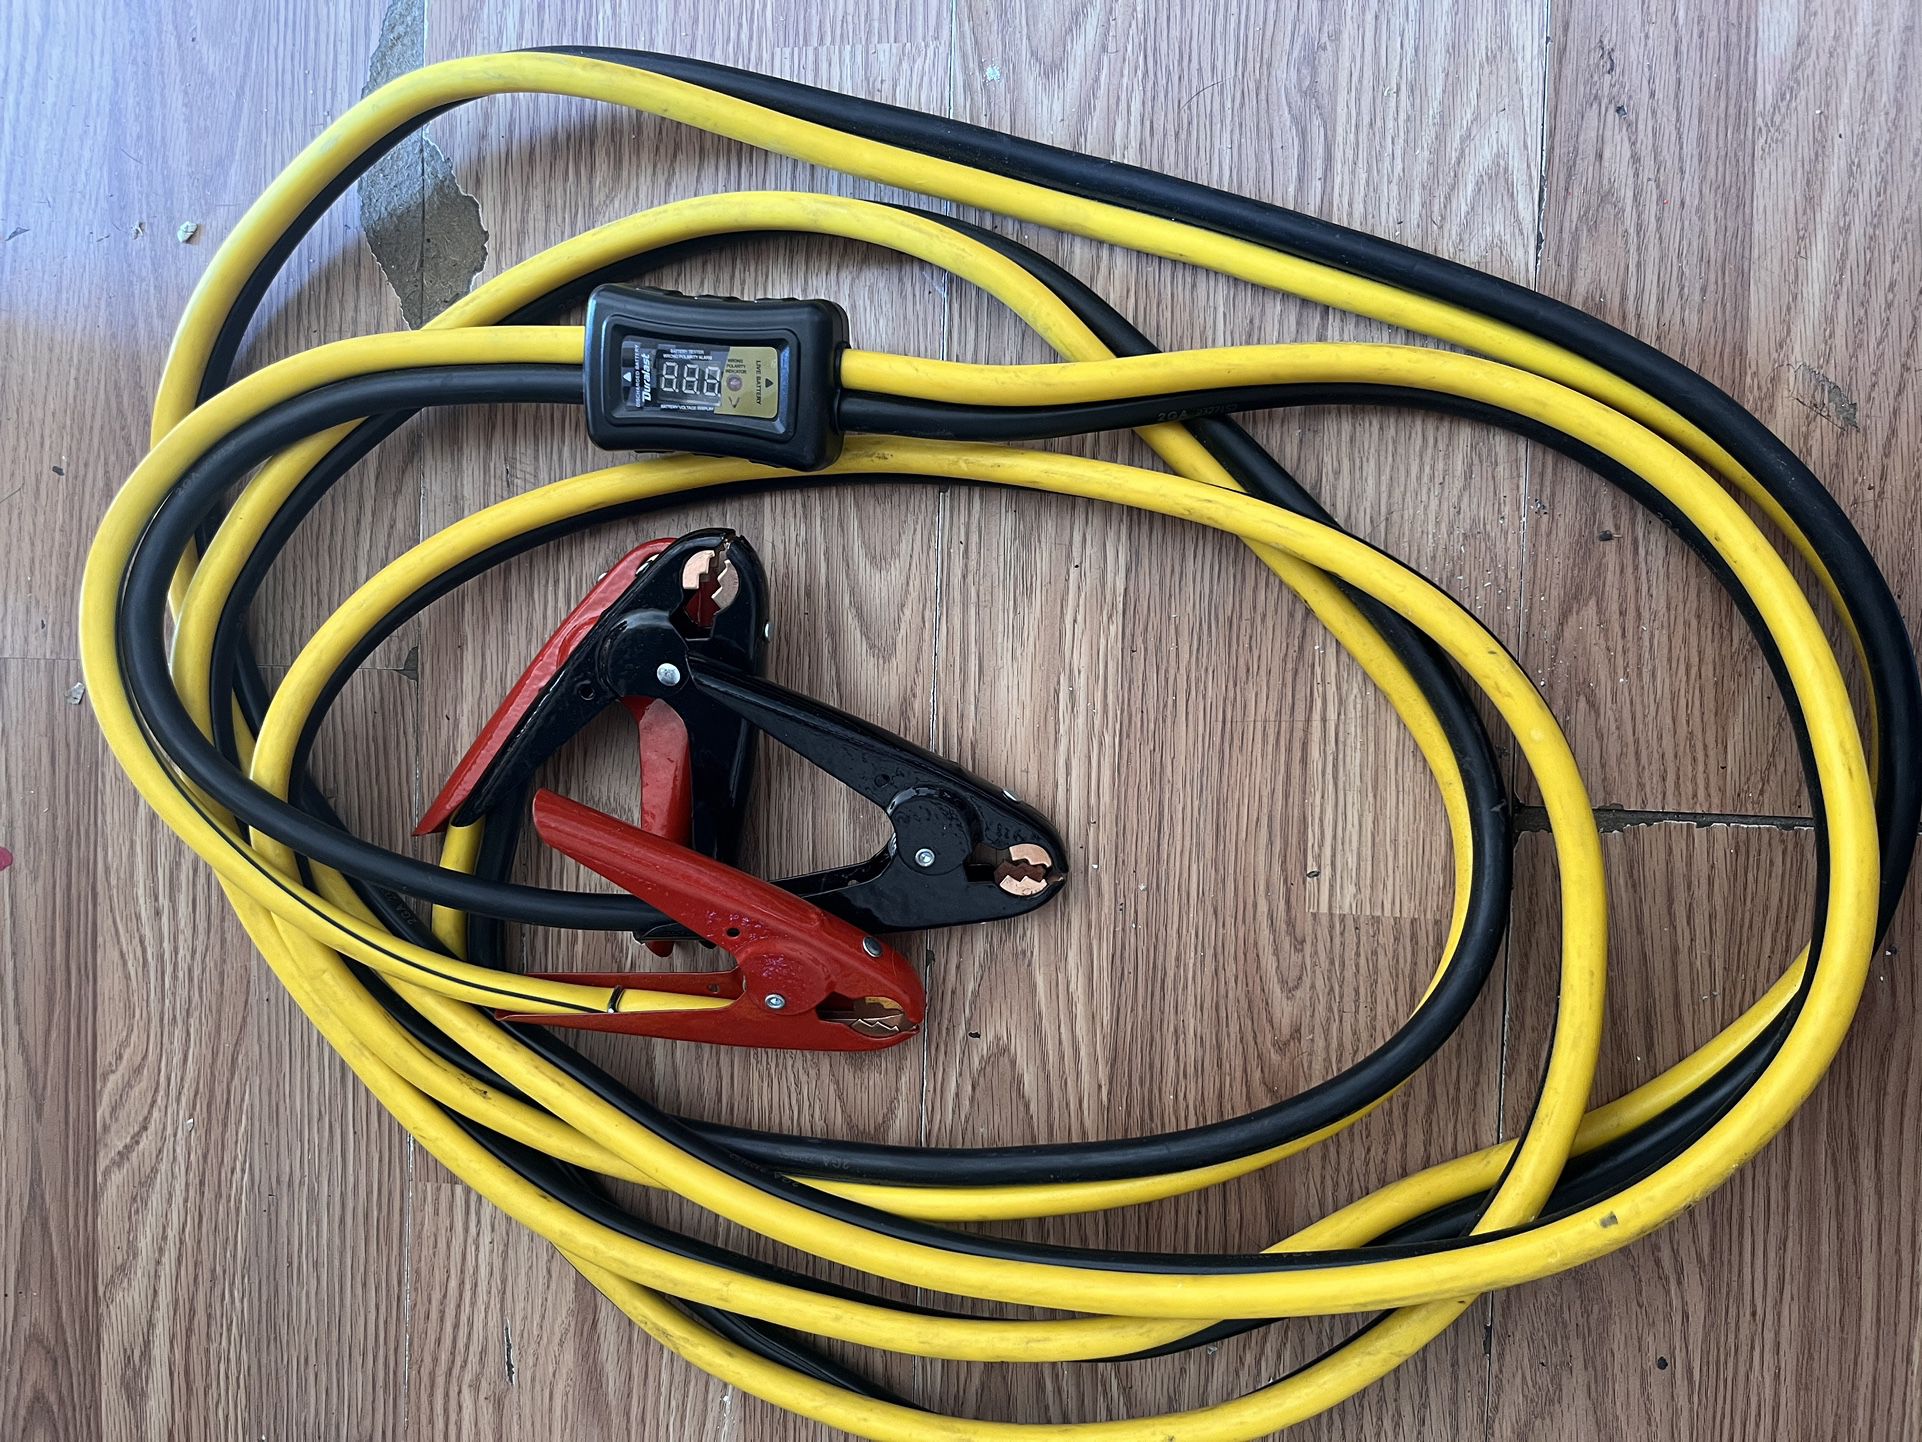 Jumper Cables Heavy Duty 